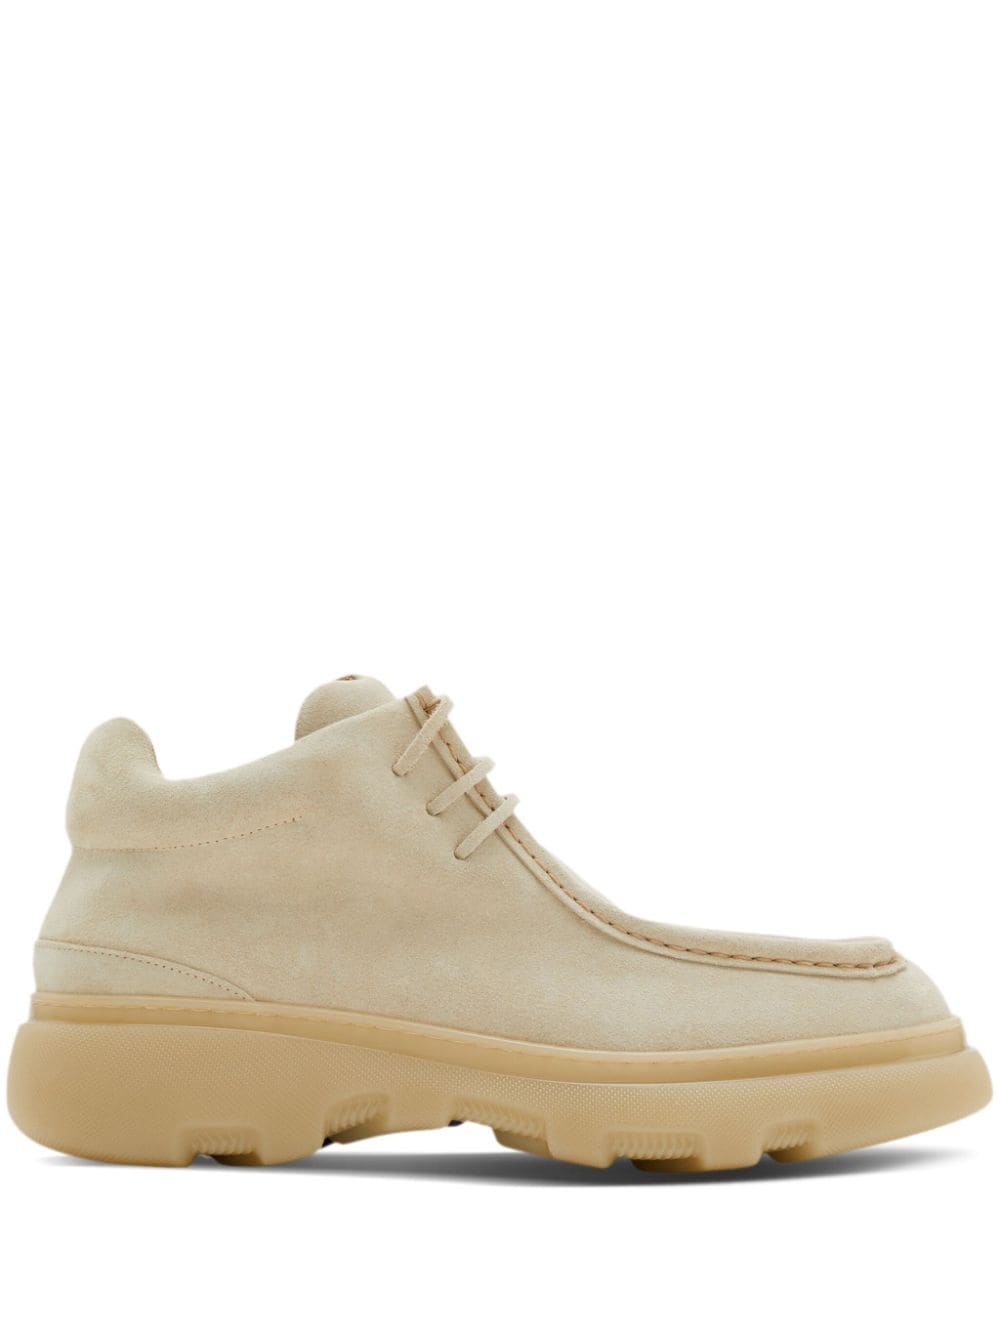 Burberry suede Creeper mid shoes - Neutrals von Burberry